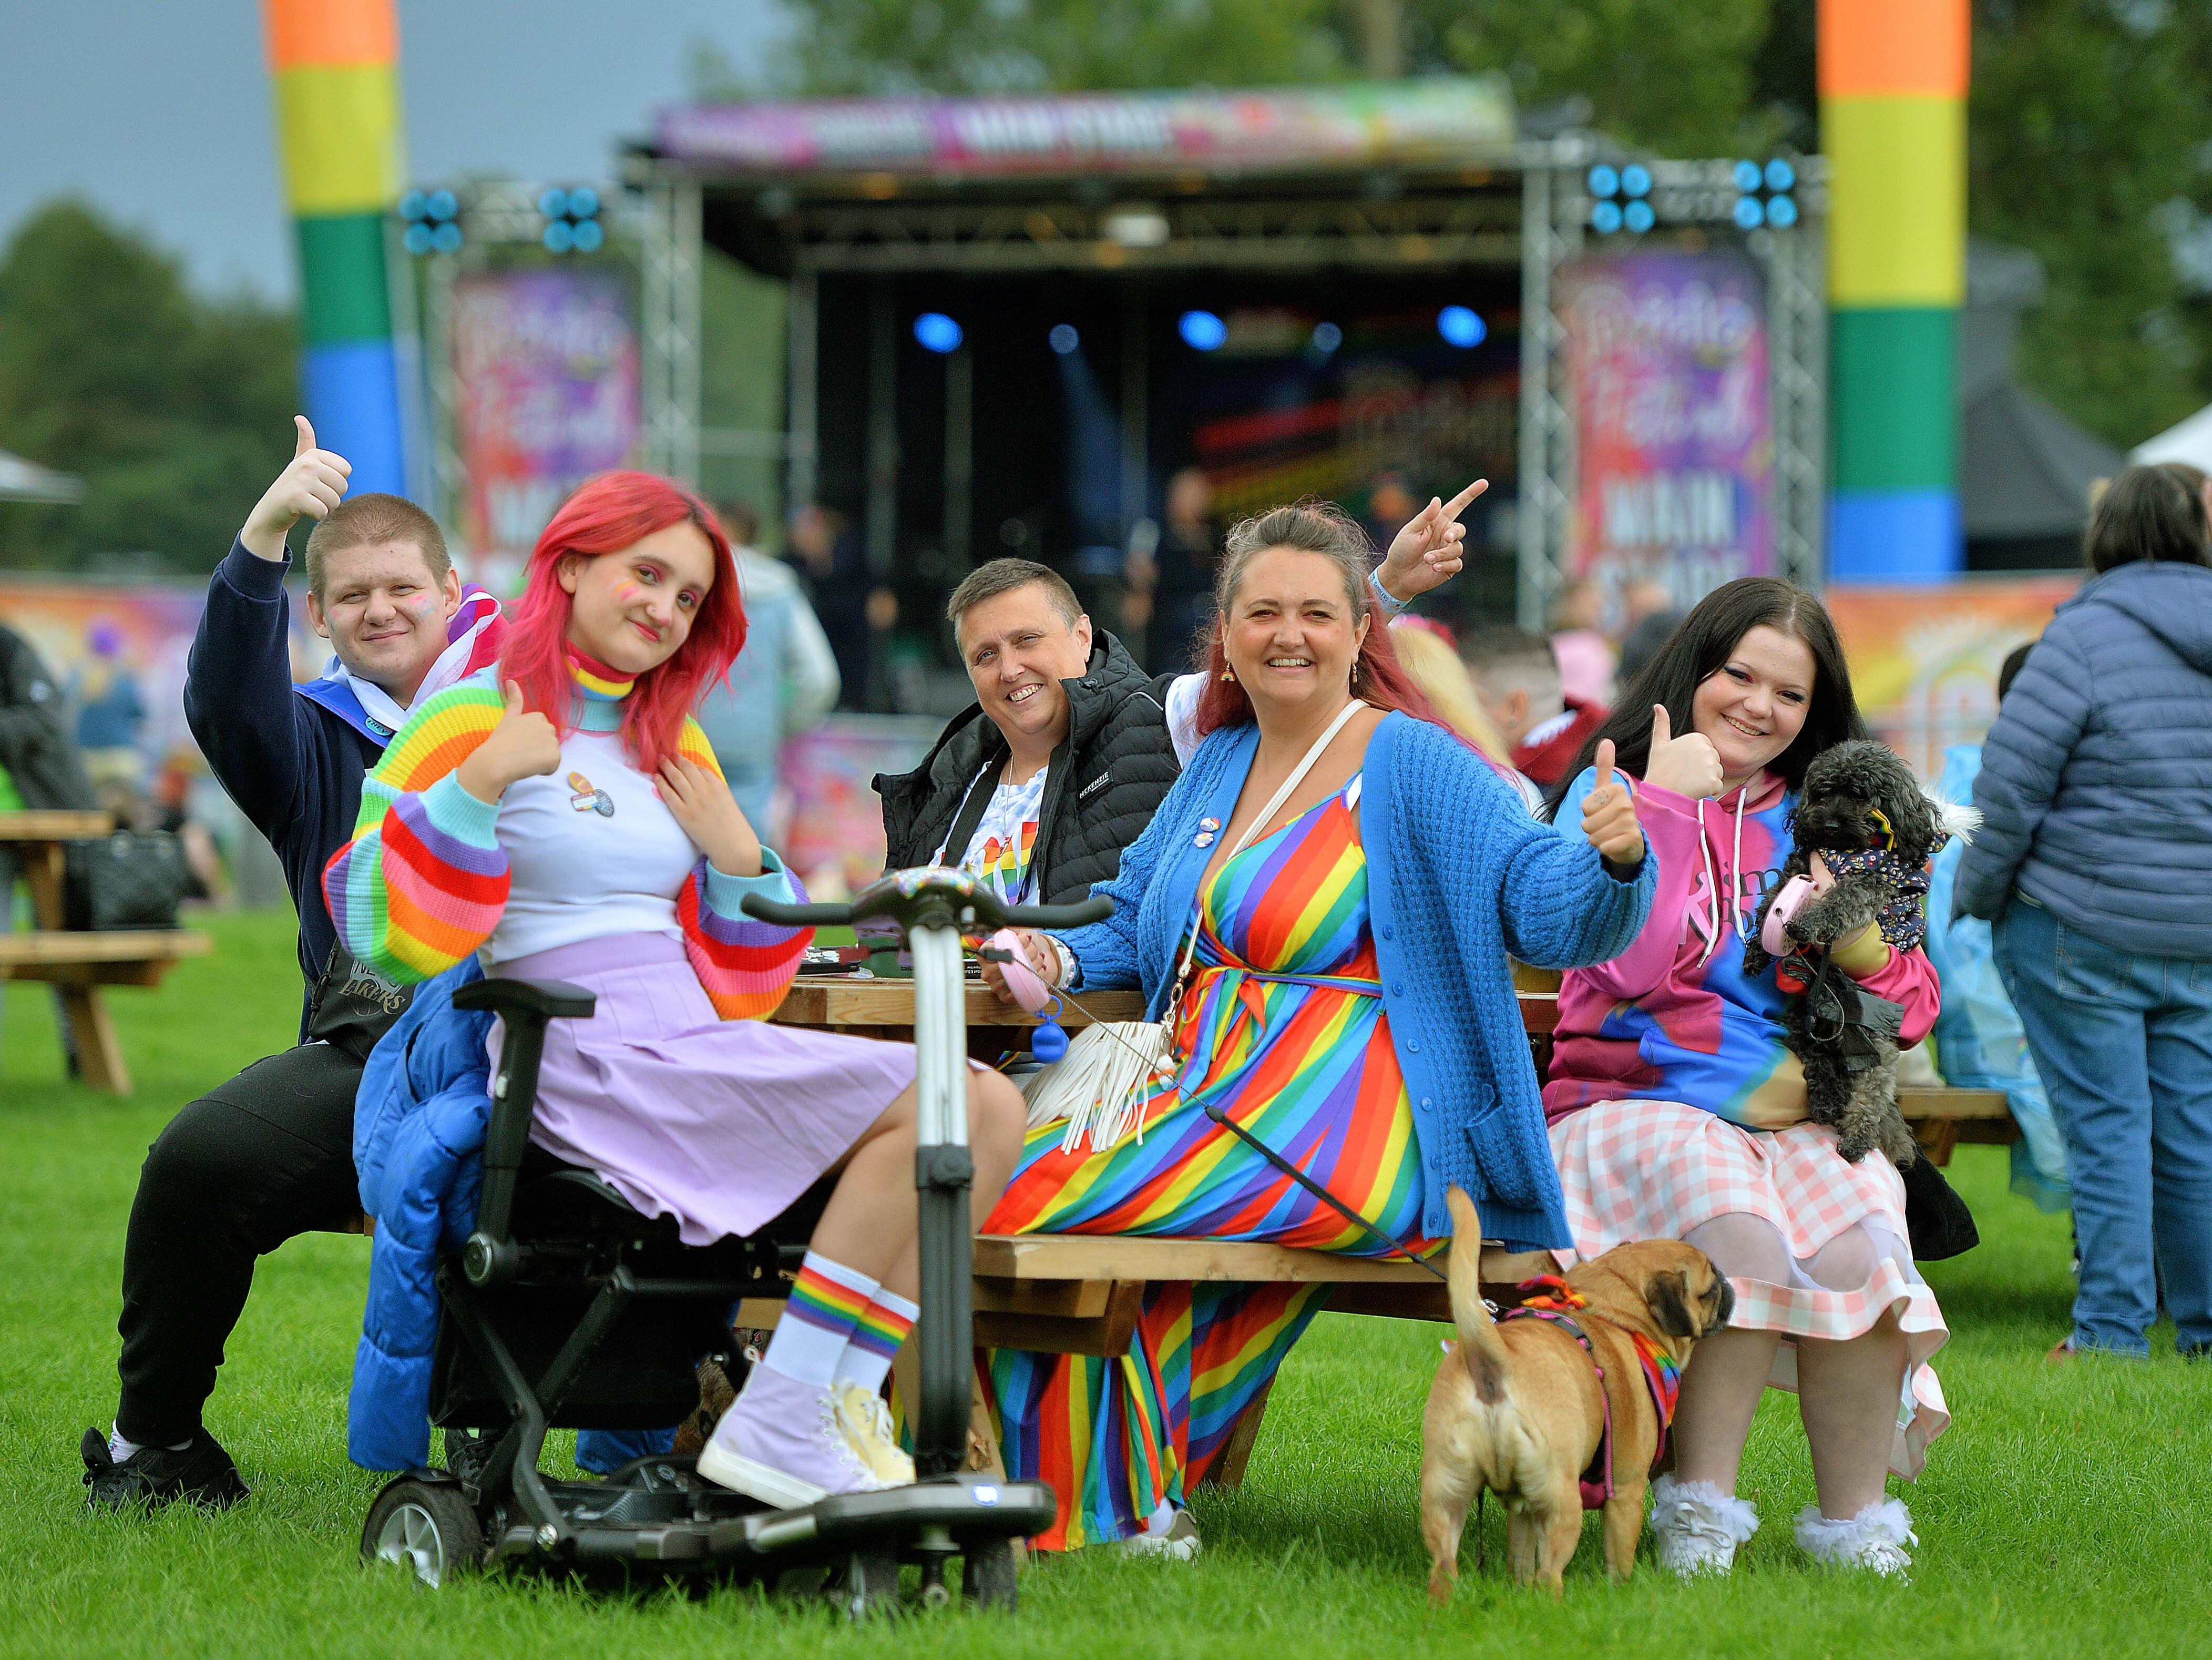 Walsall Pride festival set to bring fun, music and unity this summer